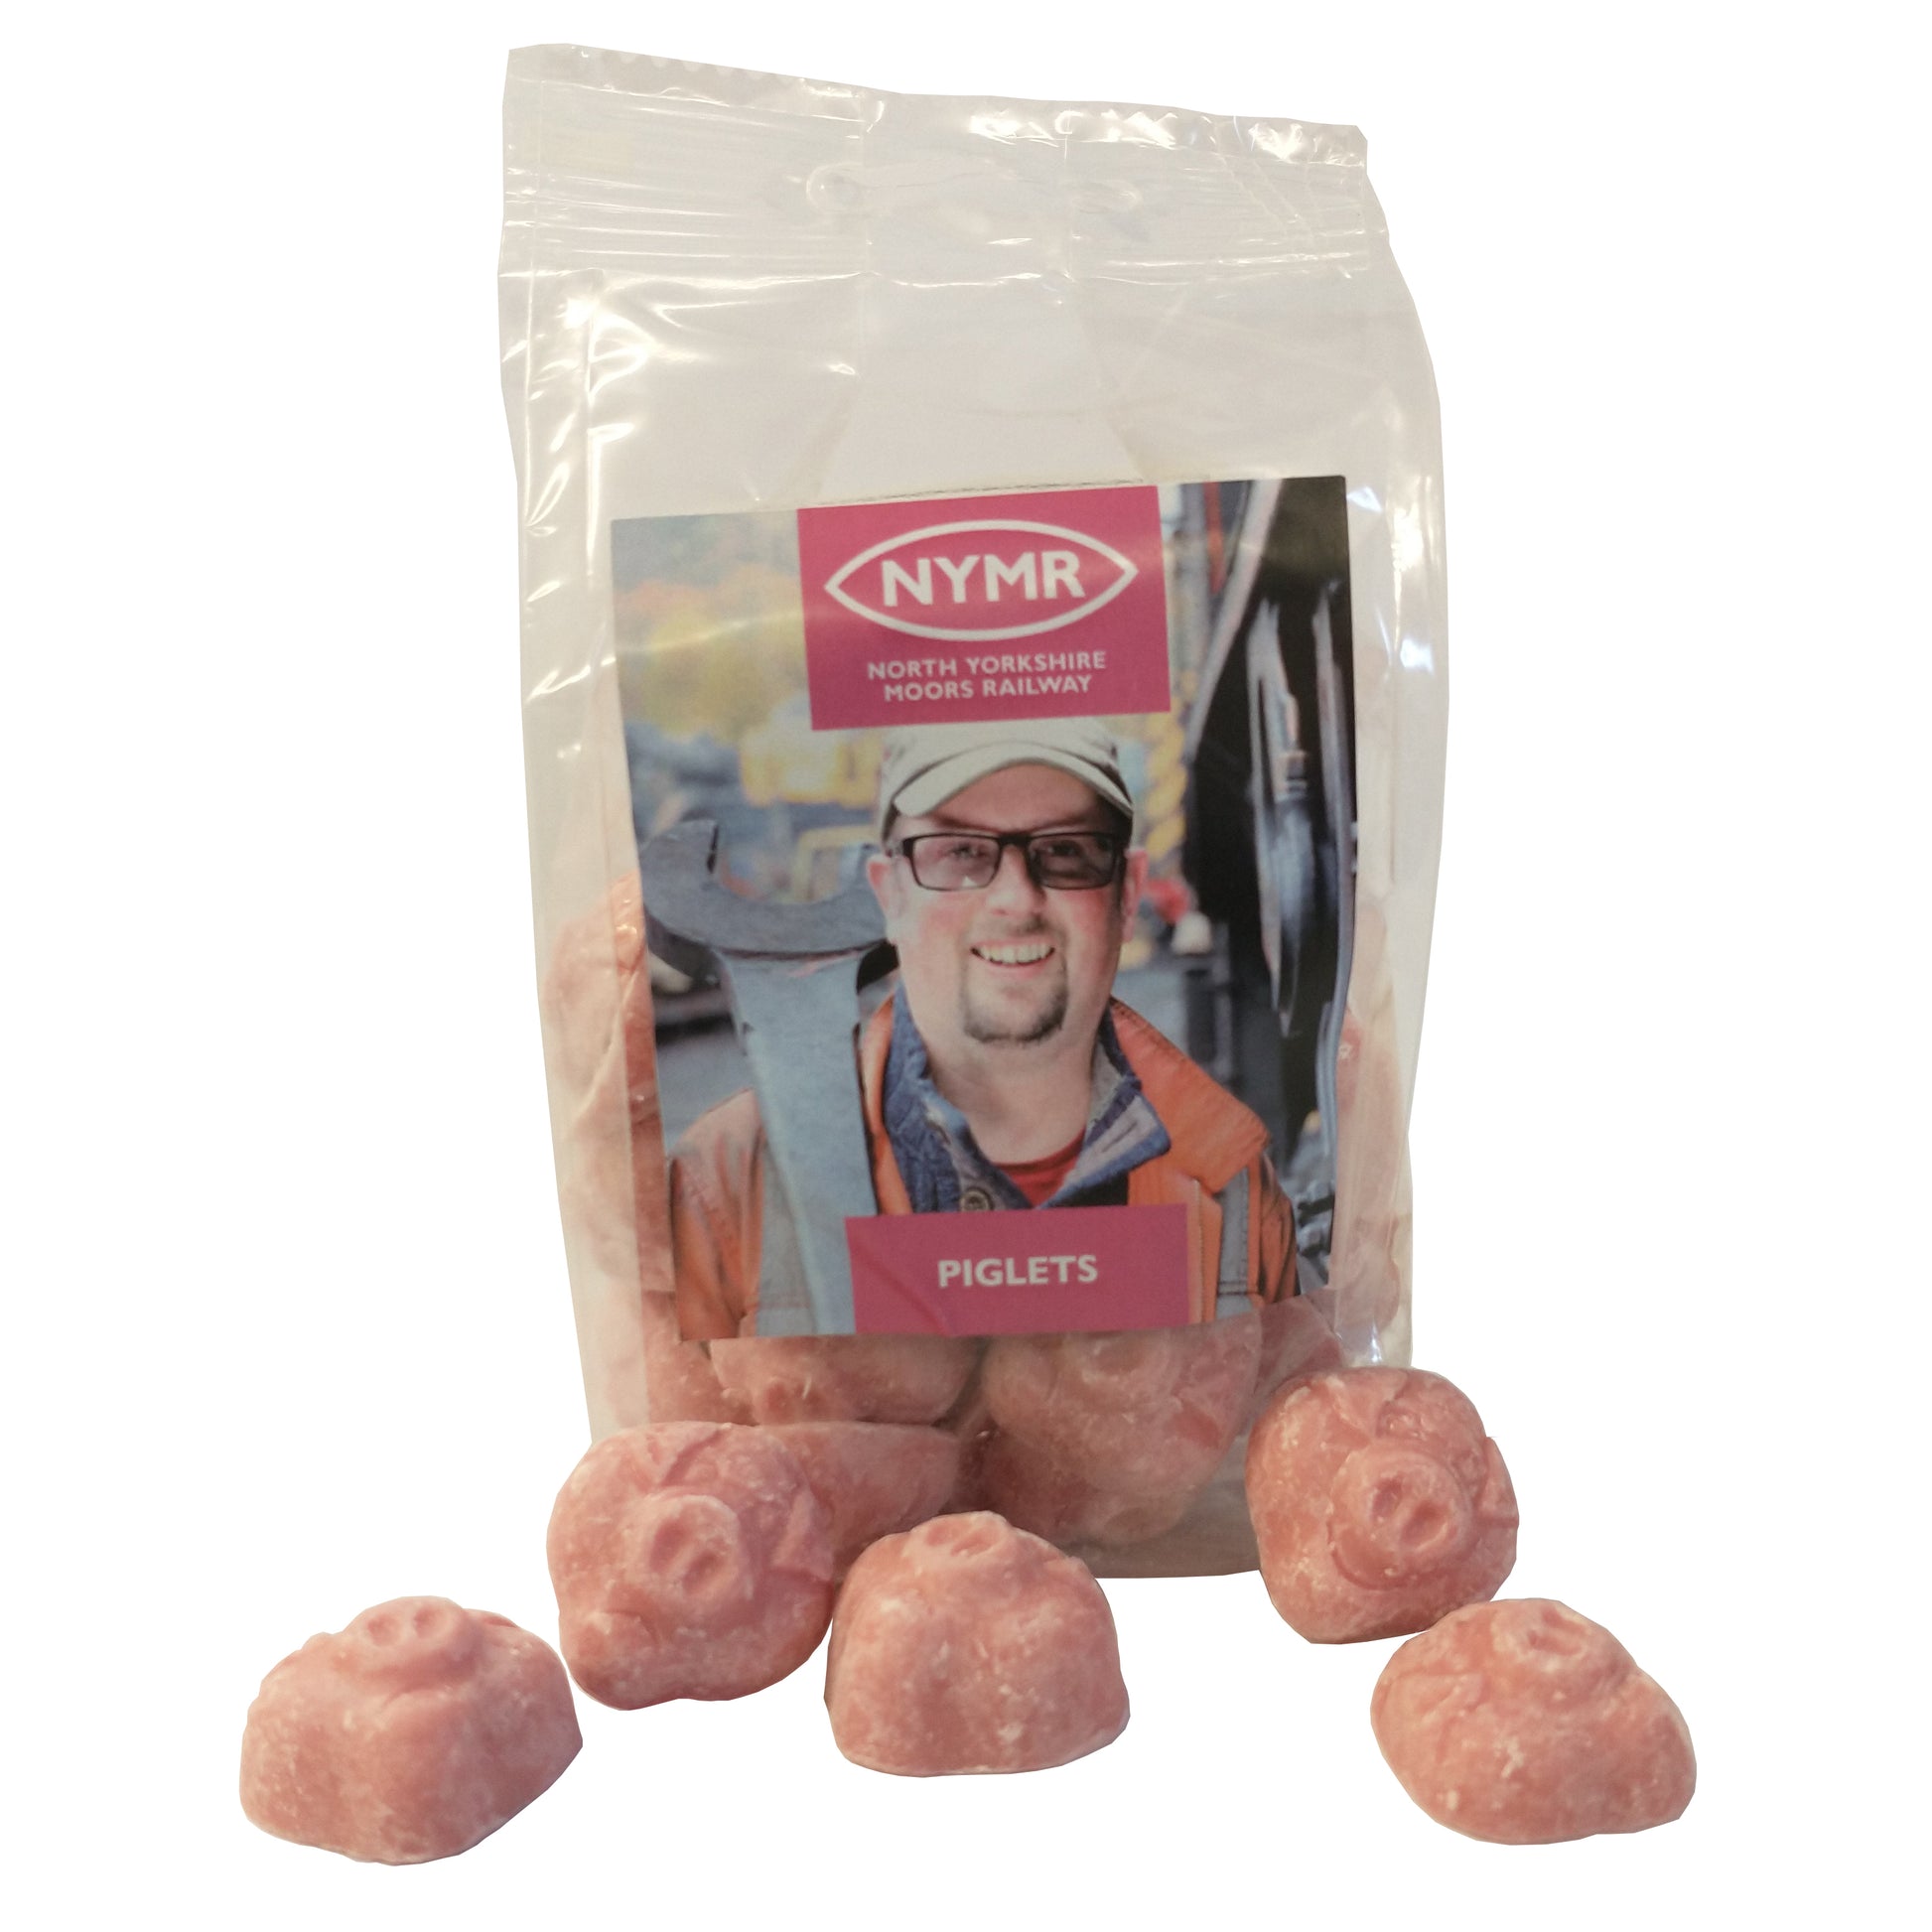 Packet of Piglets with photo of Piglet with an enormous spanner on the front and some of the candies which are shaped like pigs' faces.